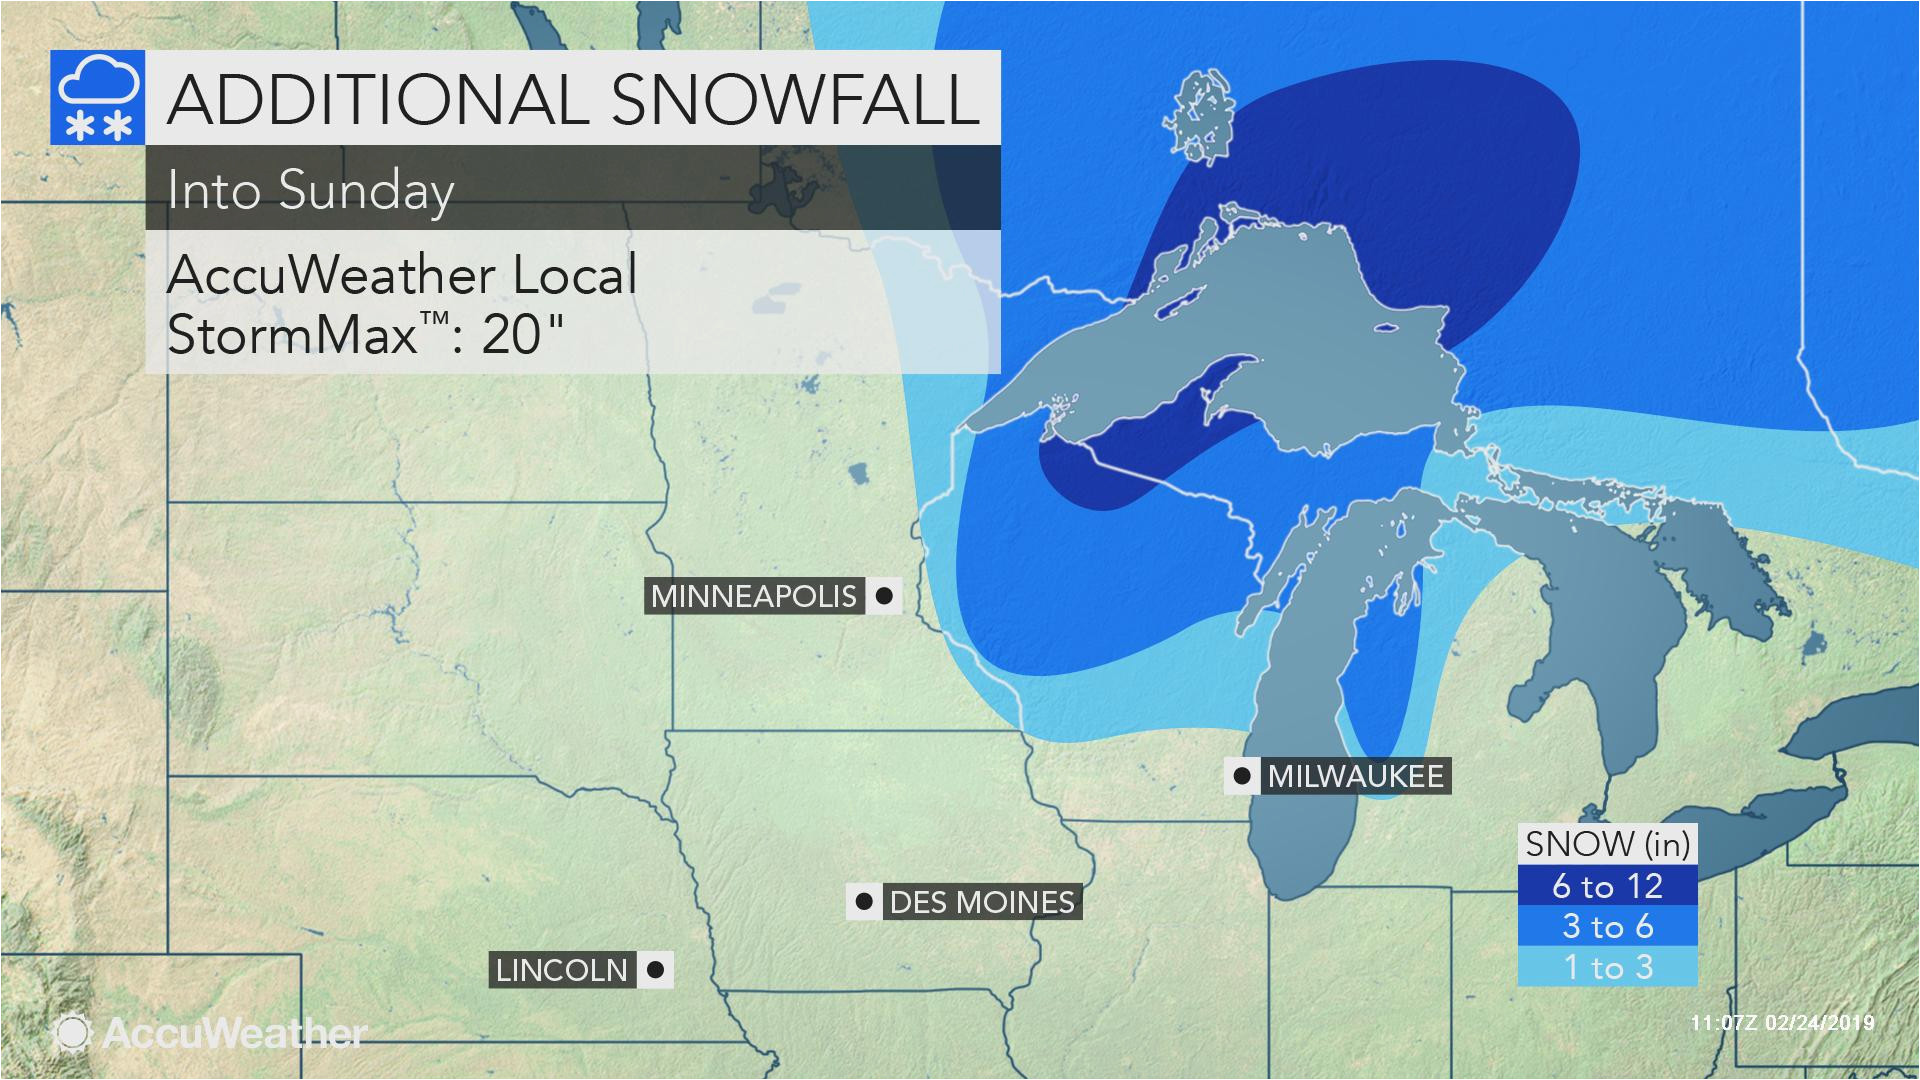 central plains blizzard to spread to upper midwest into sunday